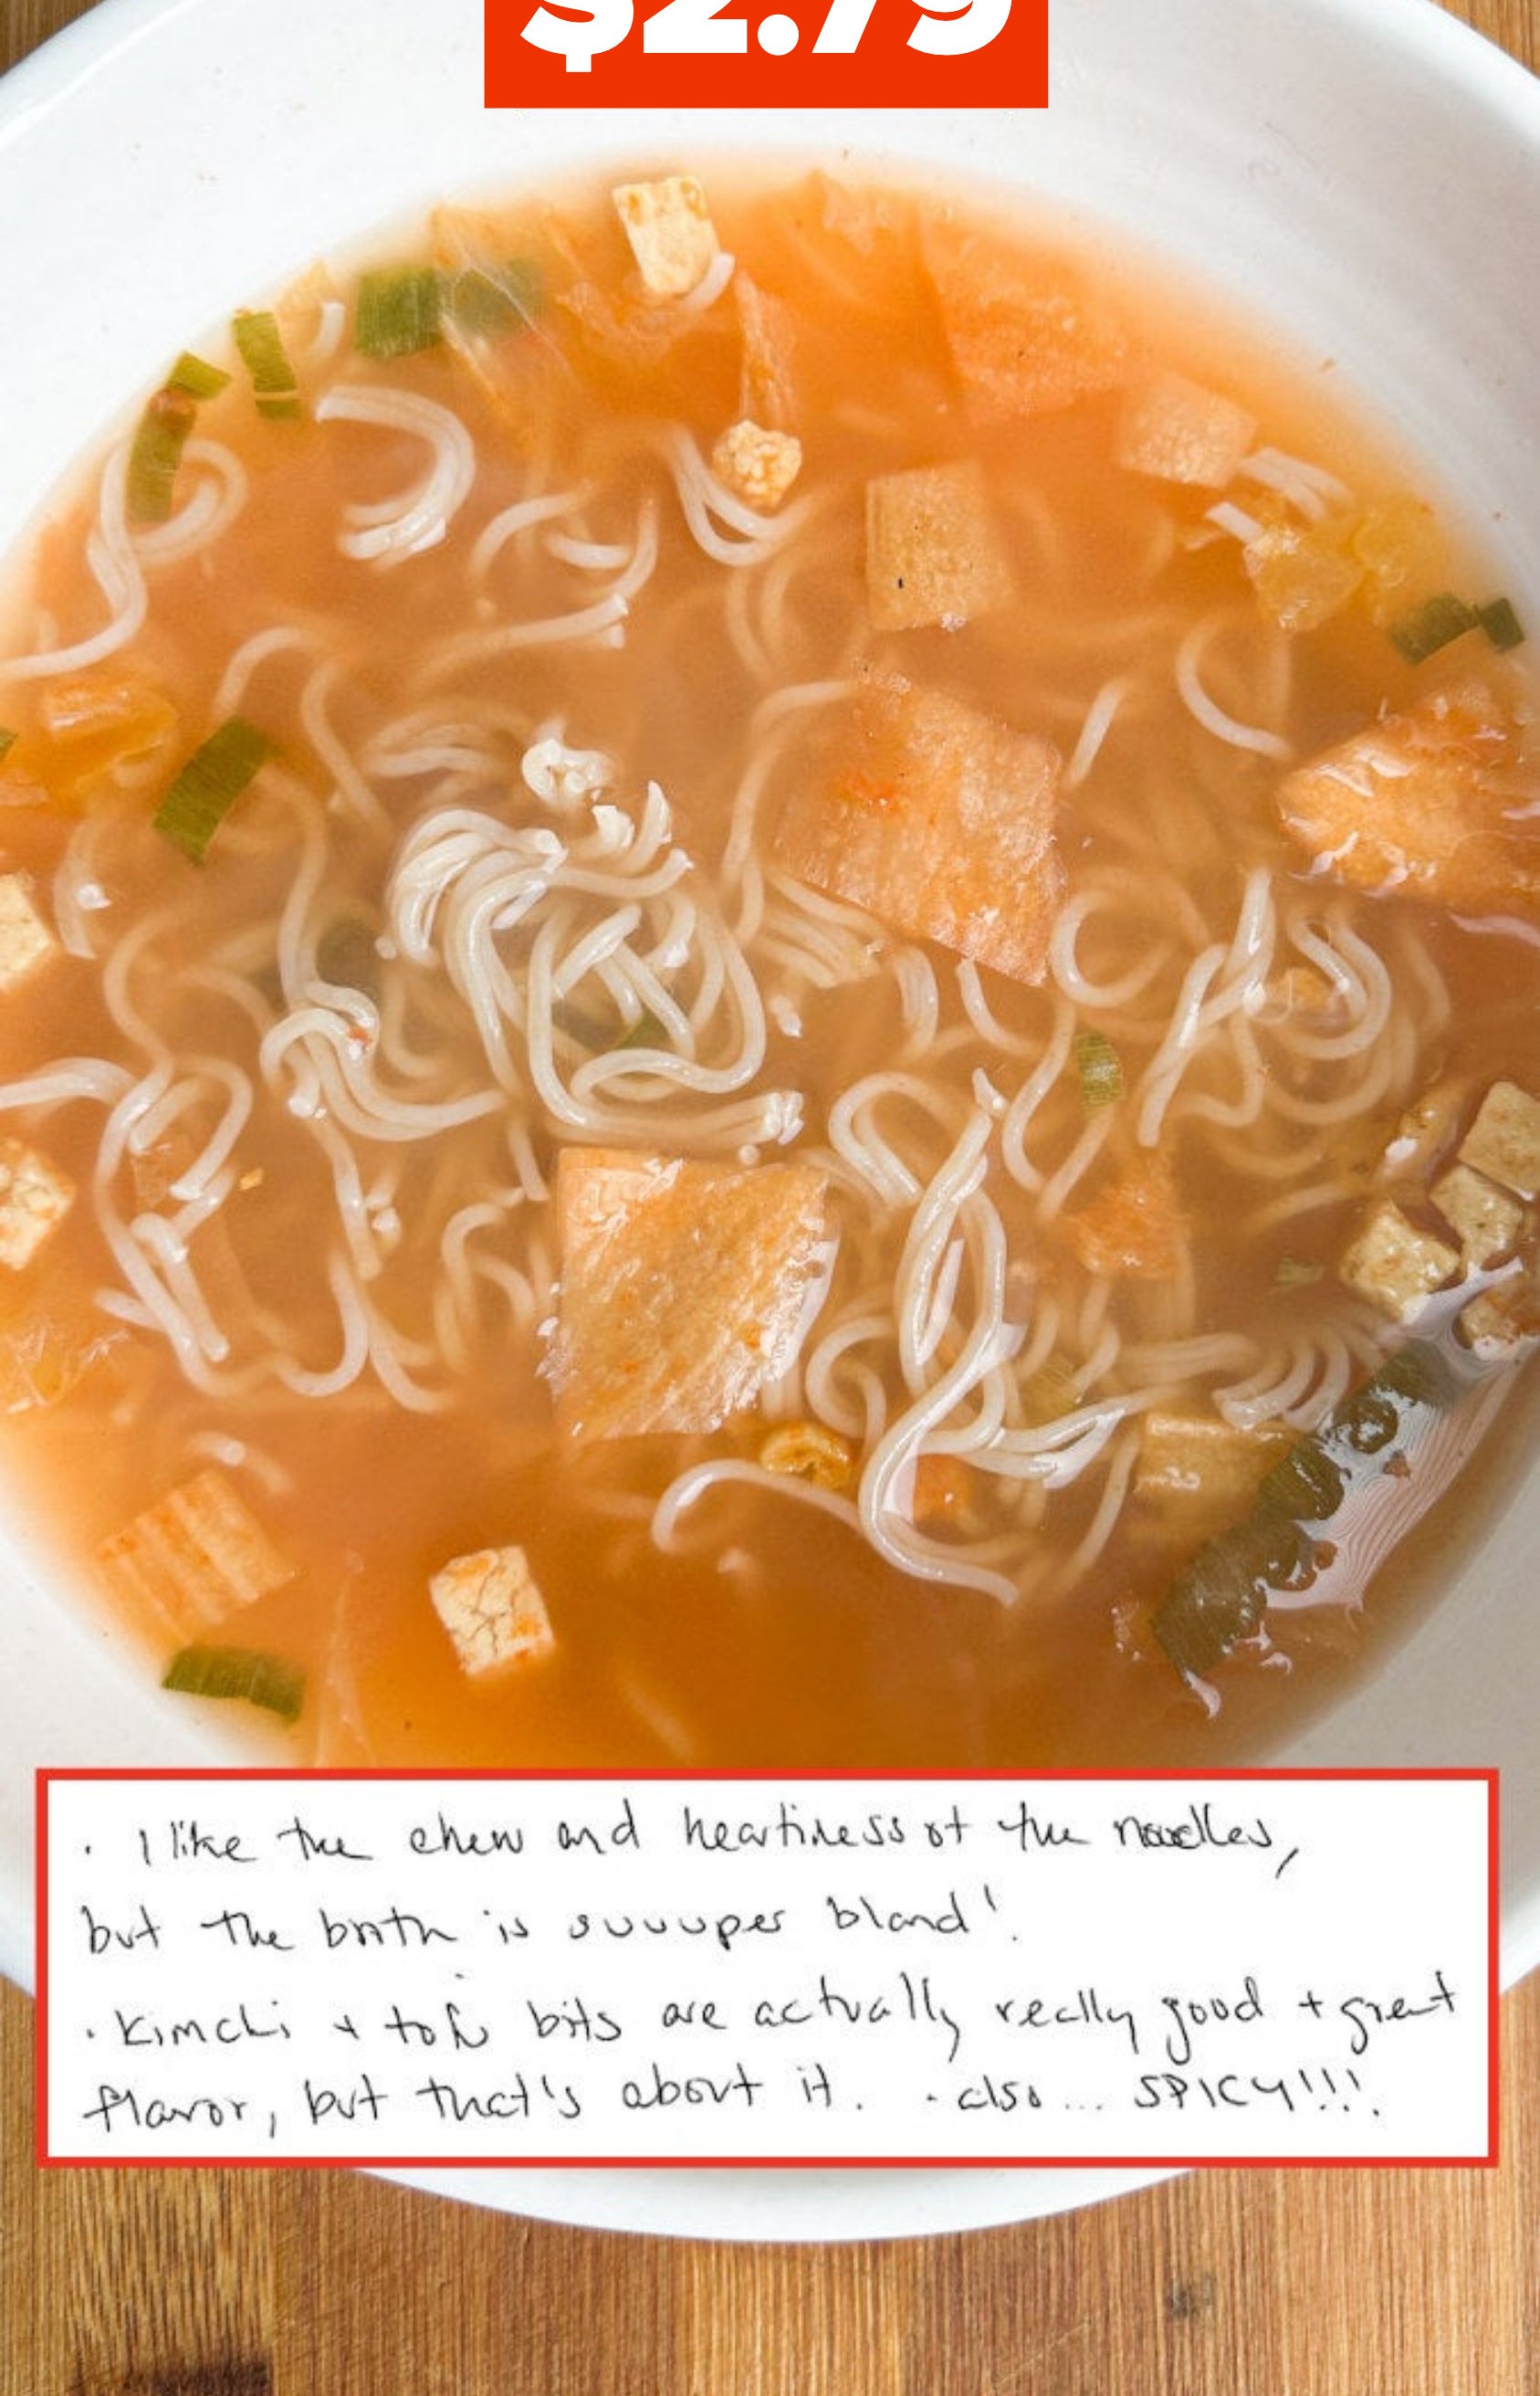 $2.79 for the noodes, and the brother is super bland, as written in notes